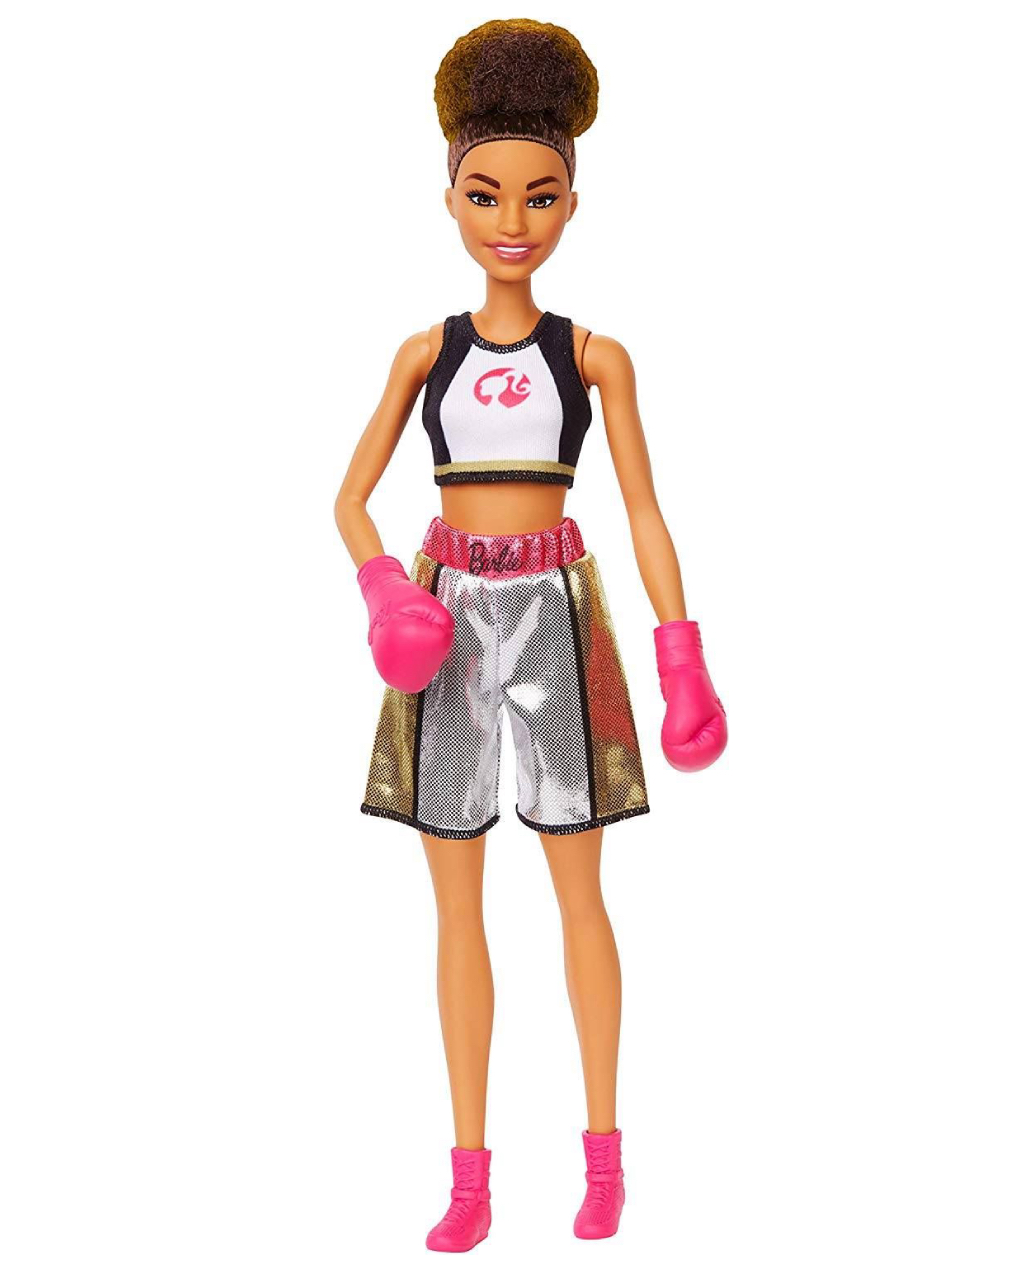 Barbie You Can Be...boxer 2019